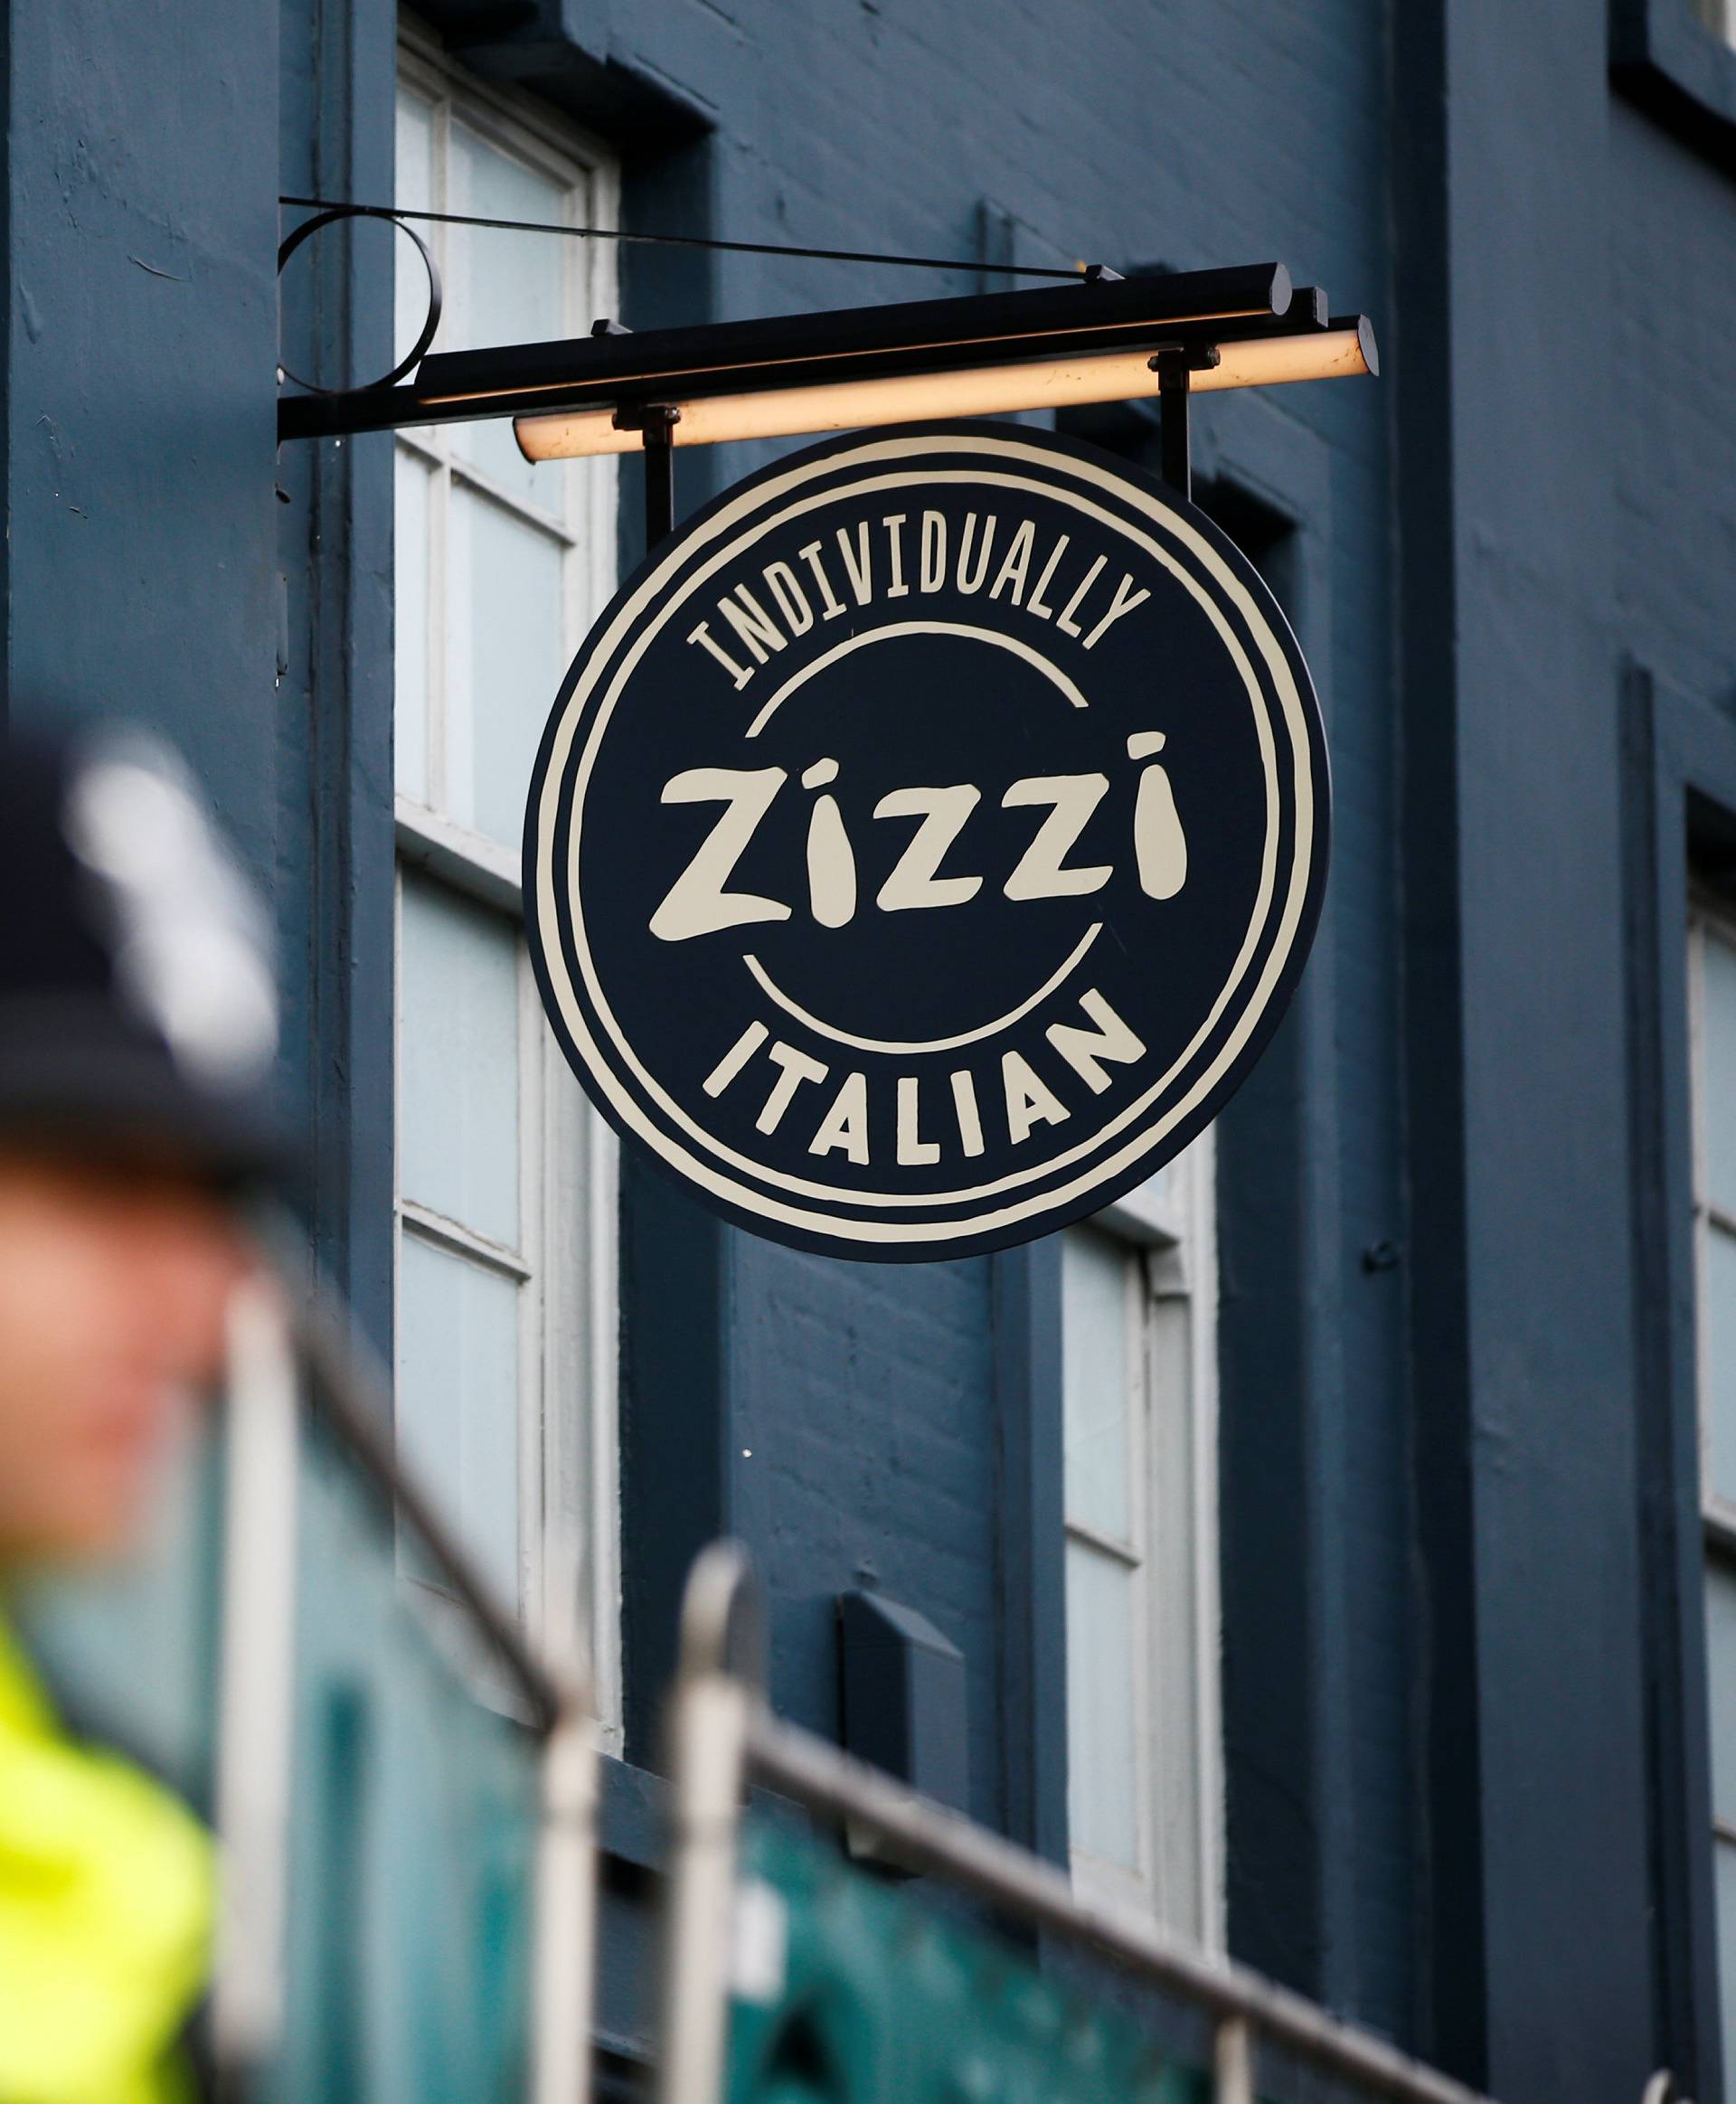 Police officers stand on duty outside a restaurant which has been secured as part of the investigation into the poisoning of former Russian inteligence agent Sergei Skripal and his daughter Yulia, in Salisbury